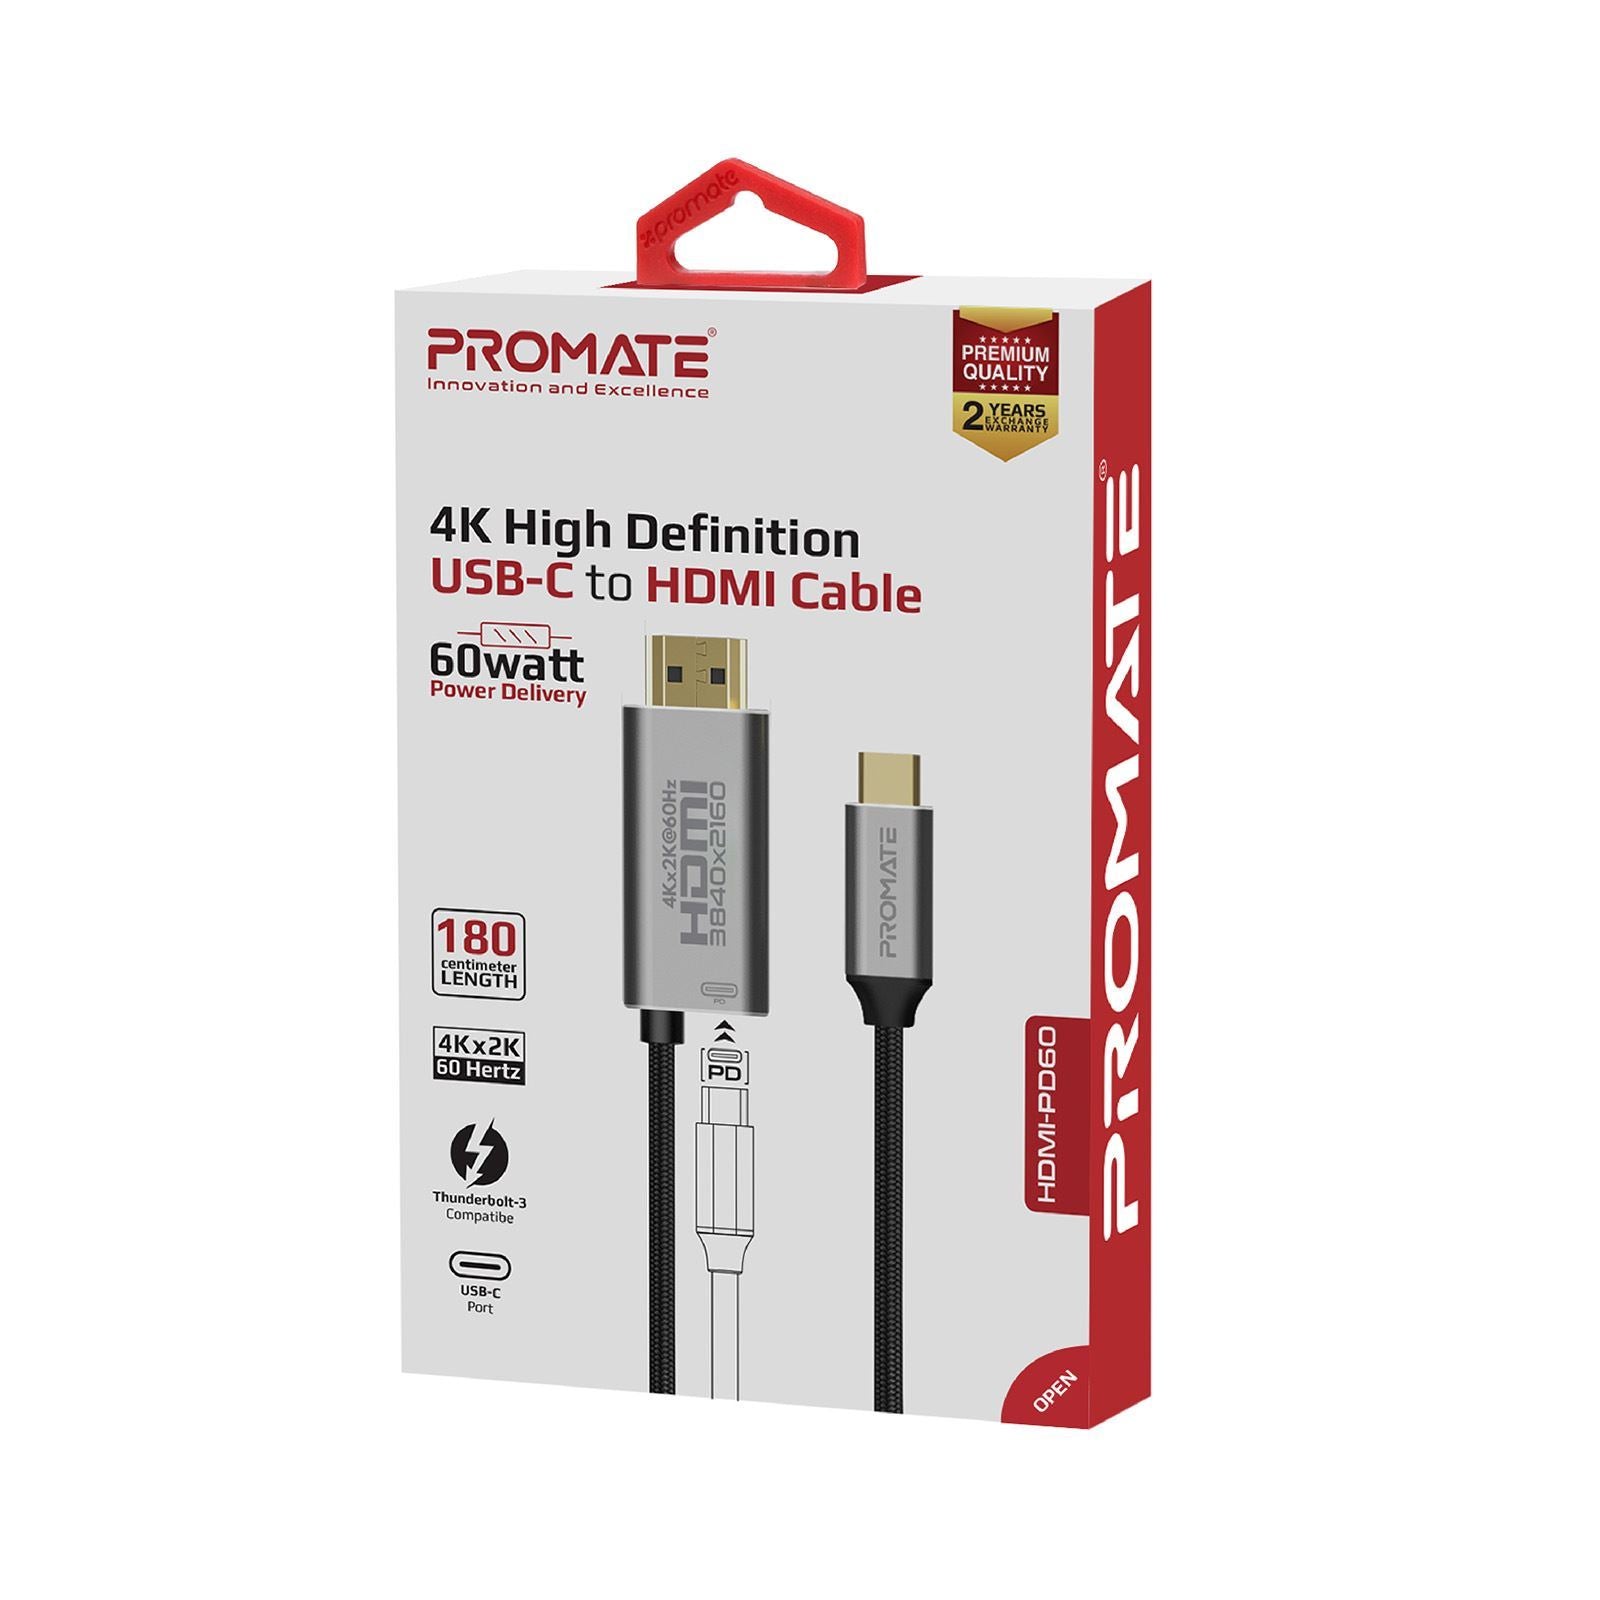 PROMATE_1.8m_4K_USB-C_to_HDMI_Cable_with_Gold_Plated_Connectors_&_Fabric_Braided_Cable._Supports_60W_PD._Alloy_Connectors._Max_Res_up_to_4K@60Hz_(4096X2160)._Plug_&_Play._Grey_Colour. 1445